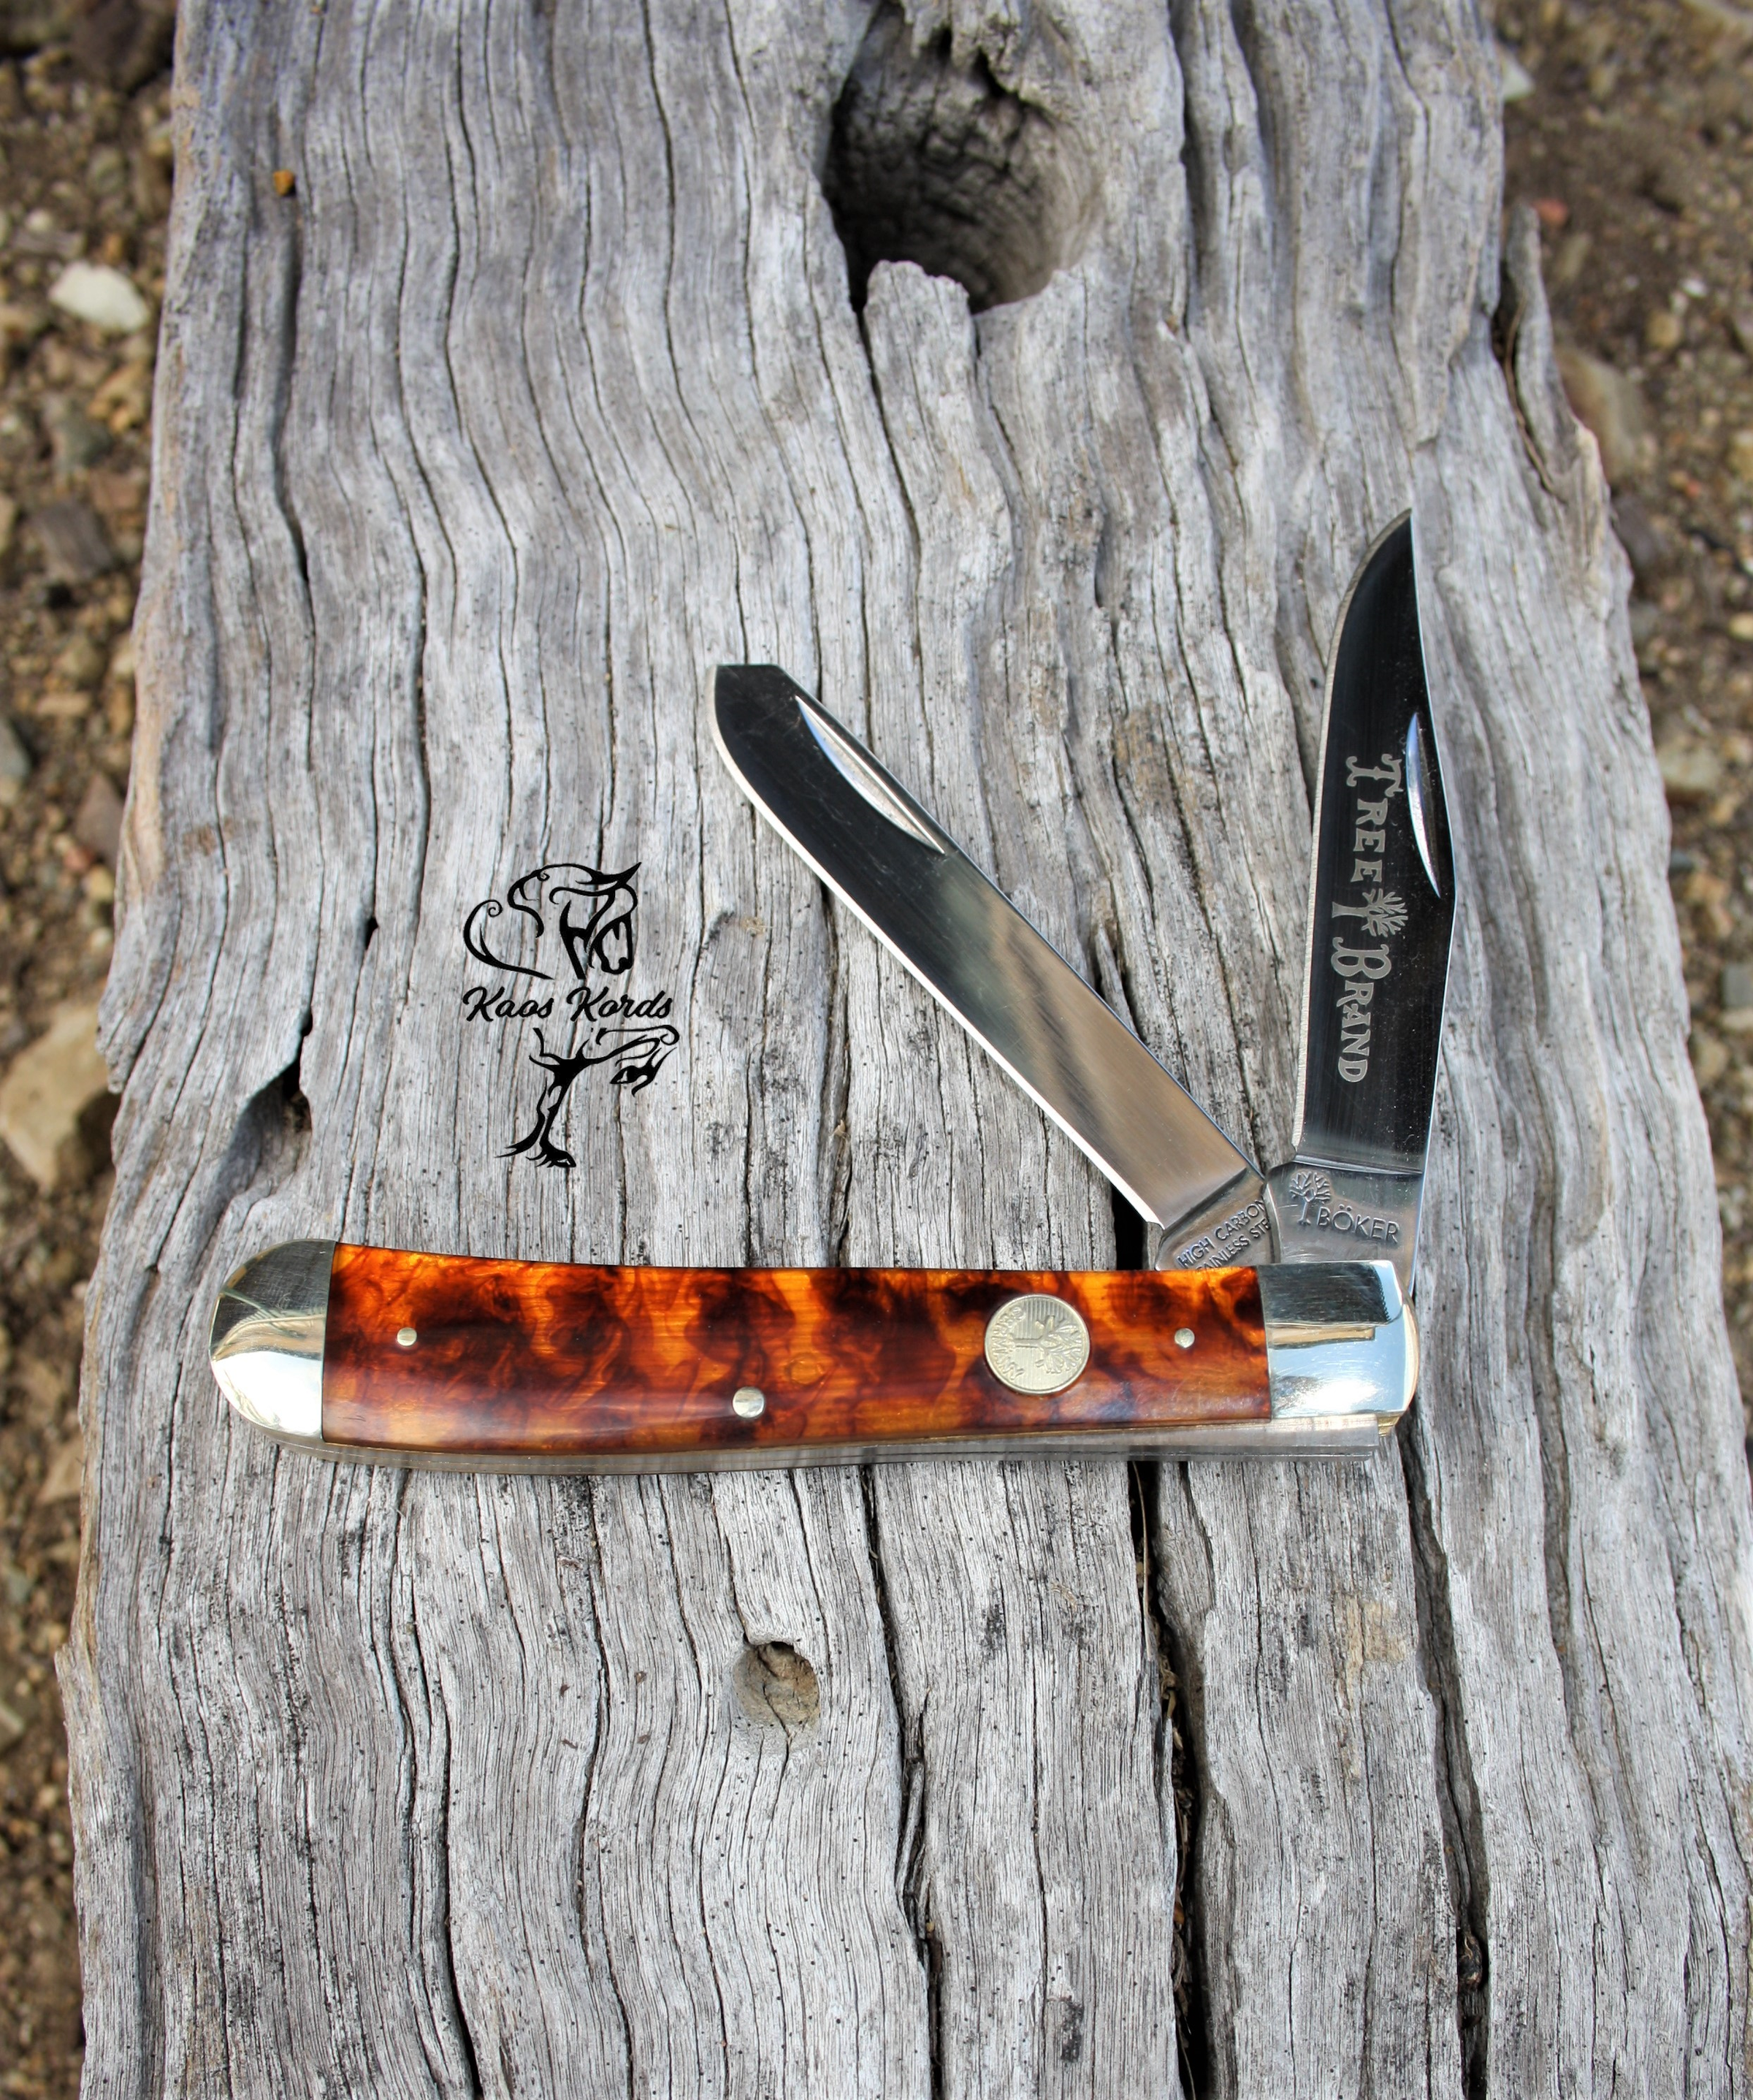 Boker Traditional Series Trapper with Faux Tortoise Handles and